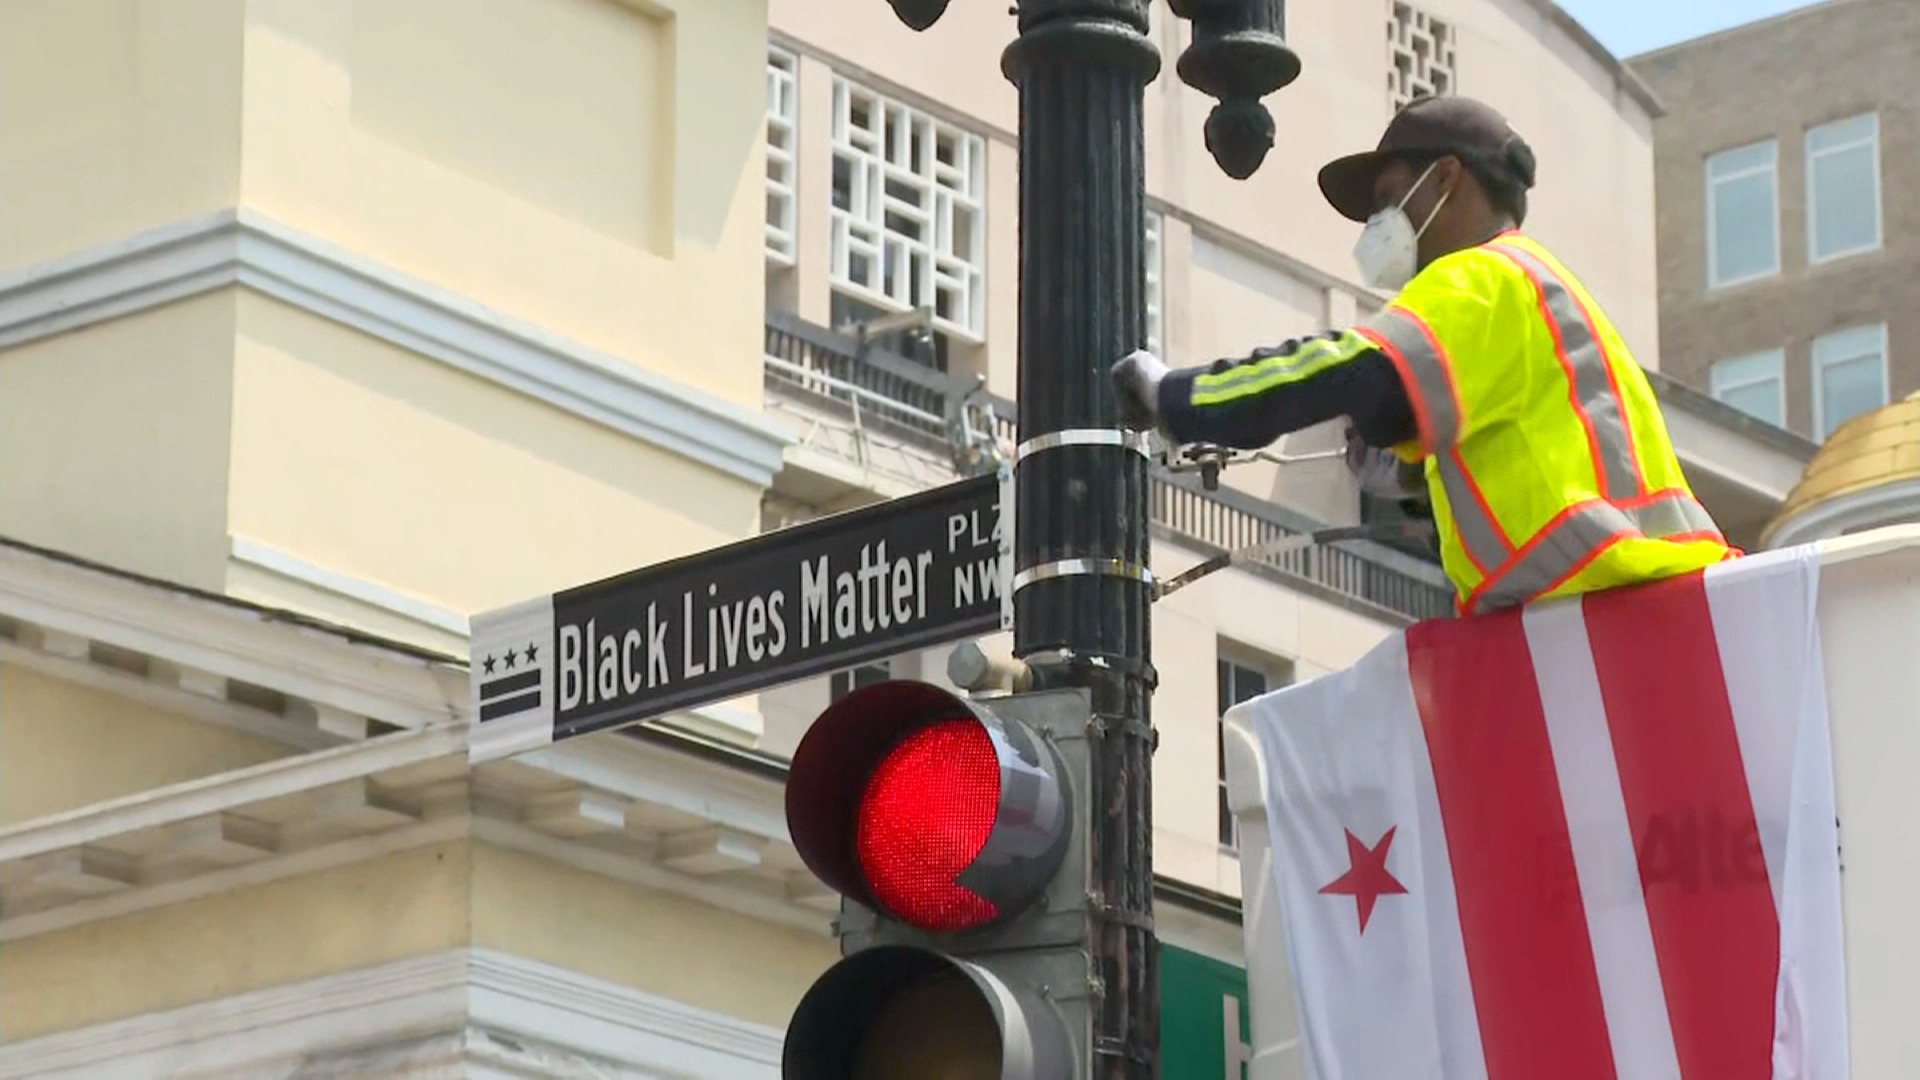 A man mounts the new "Black Lives Matter Plz NW" street sign to a pole in Washington, on June 5.